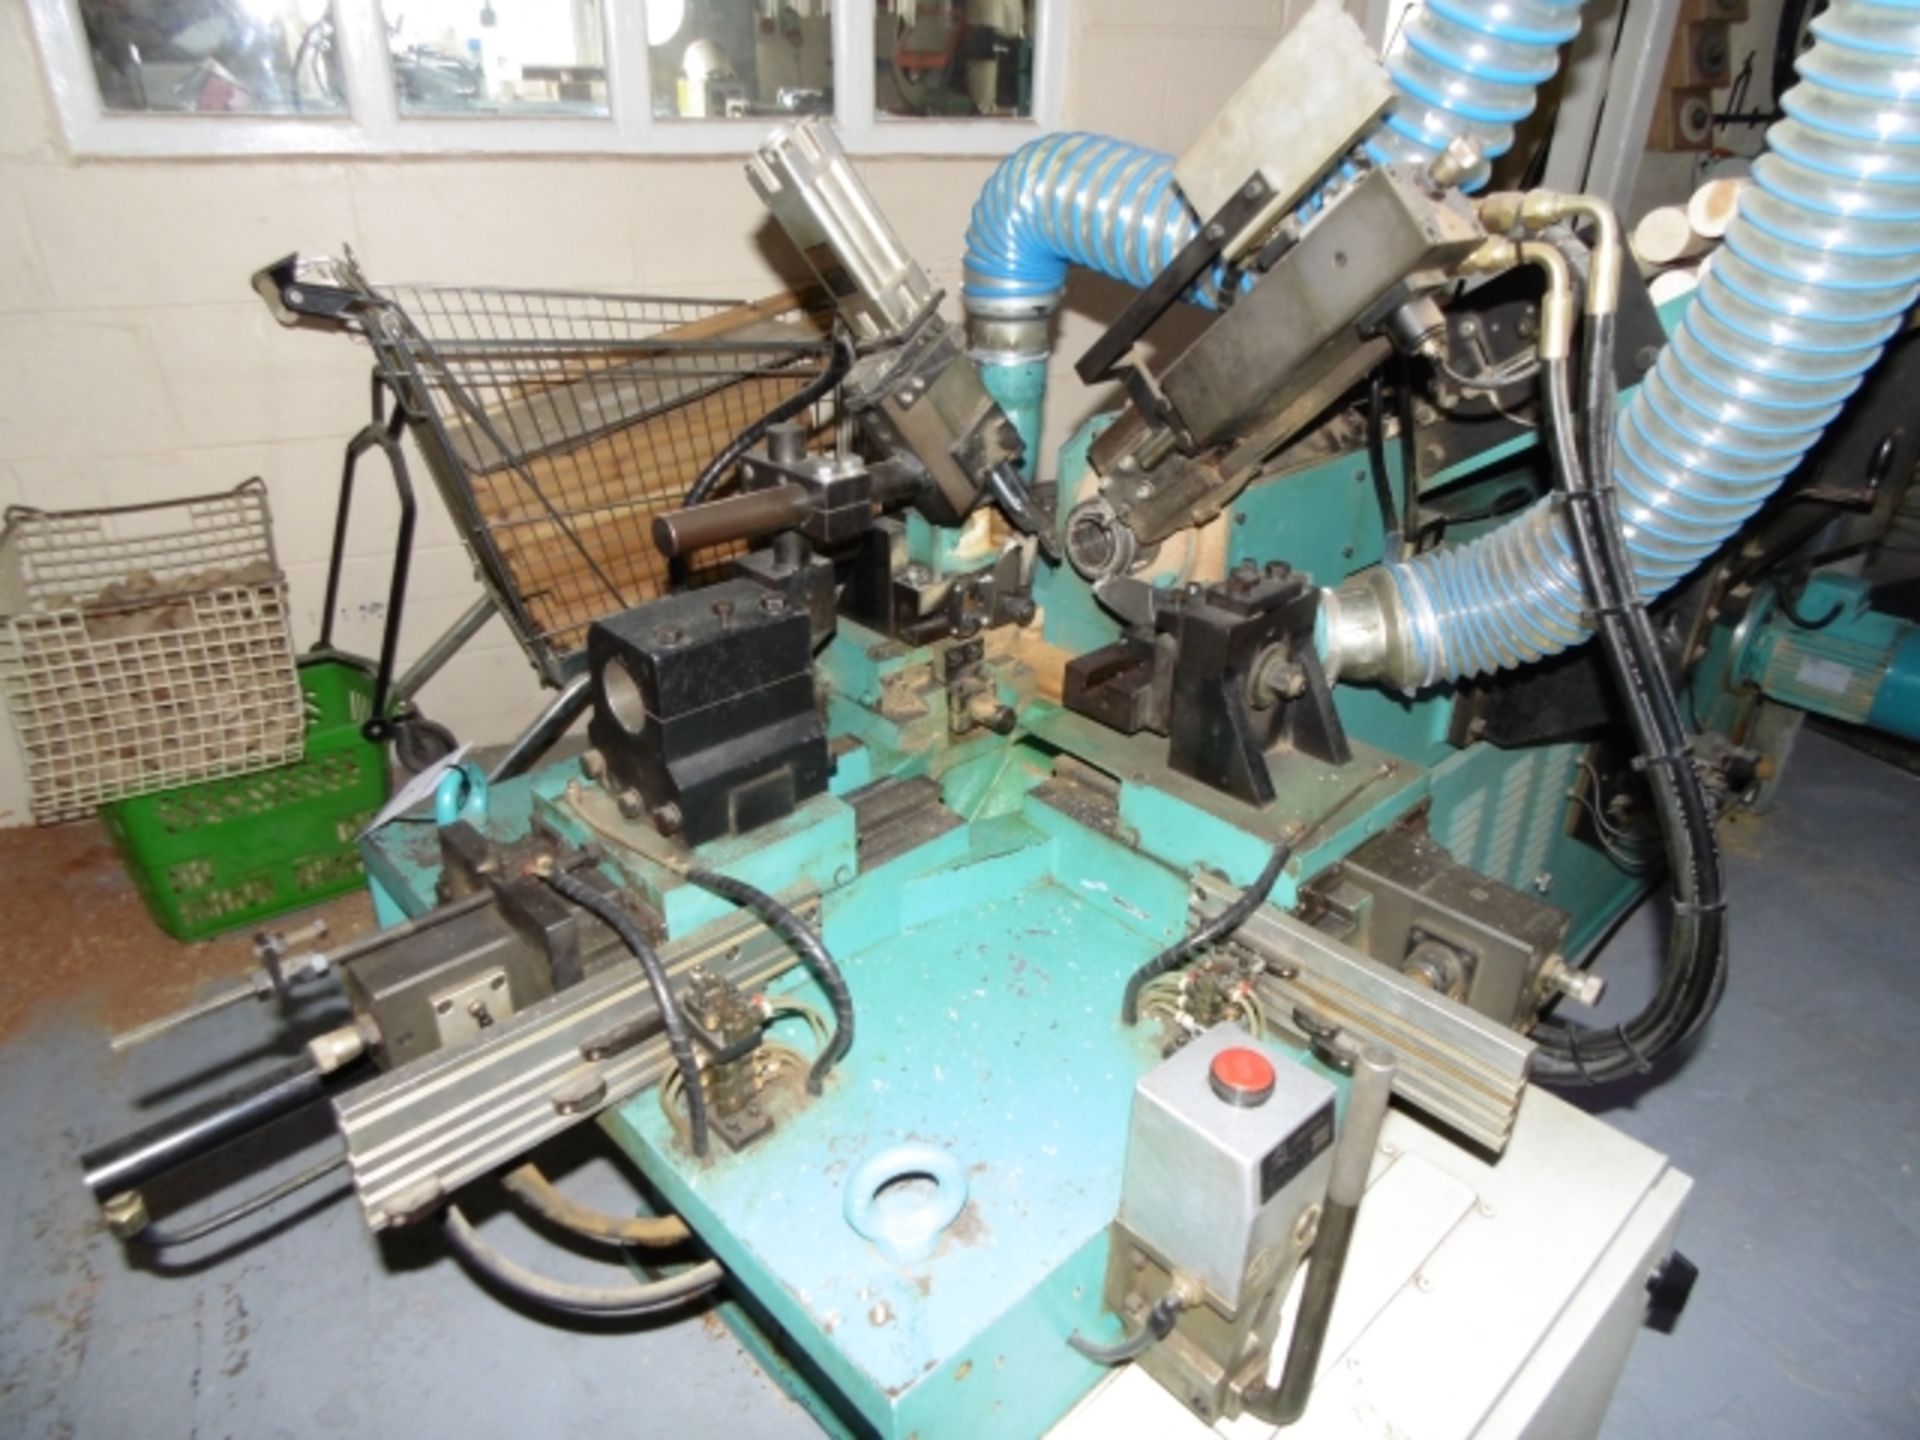 * 1997 Intorex TRV-45 Automatic Wood Turning Lathe. Serial No 201278. 2 knives, frontal tool and a - Image 9 of 11